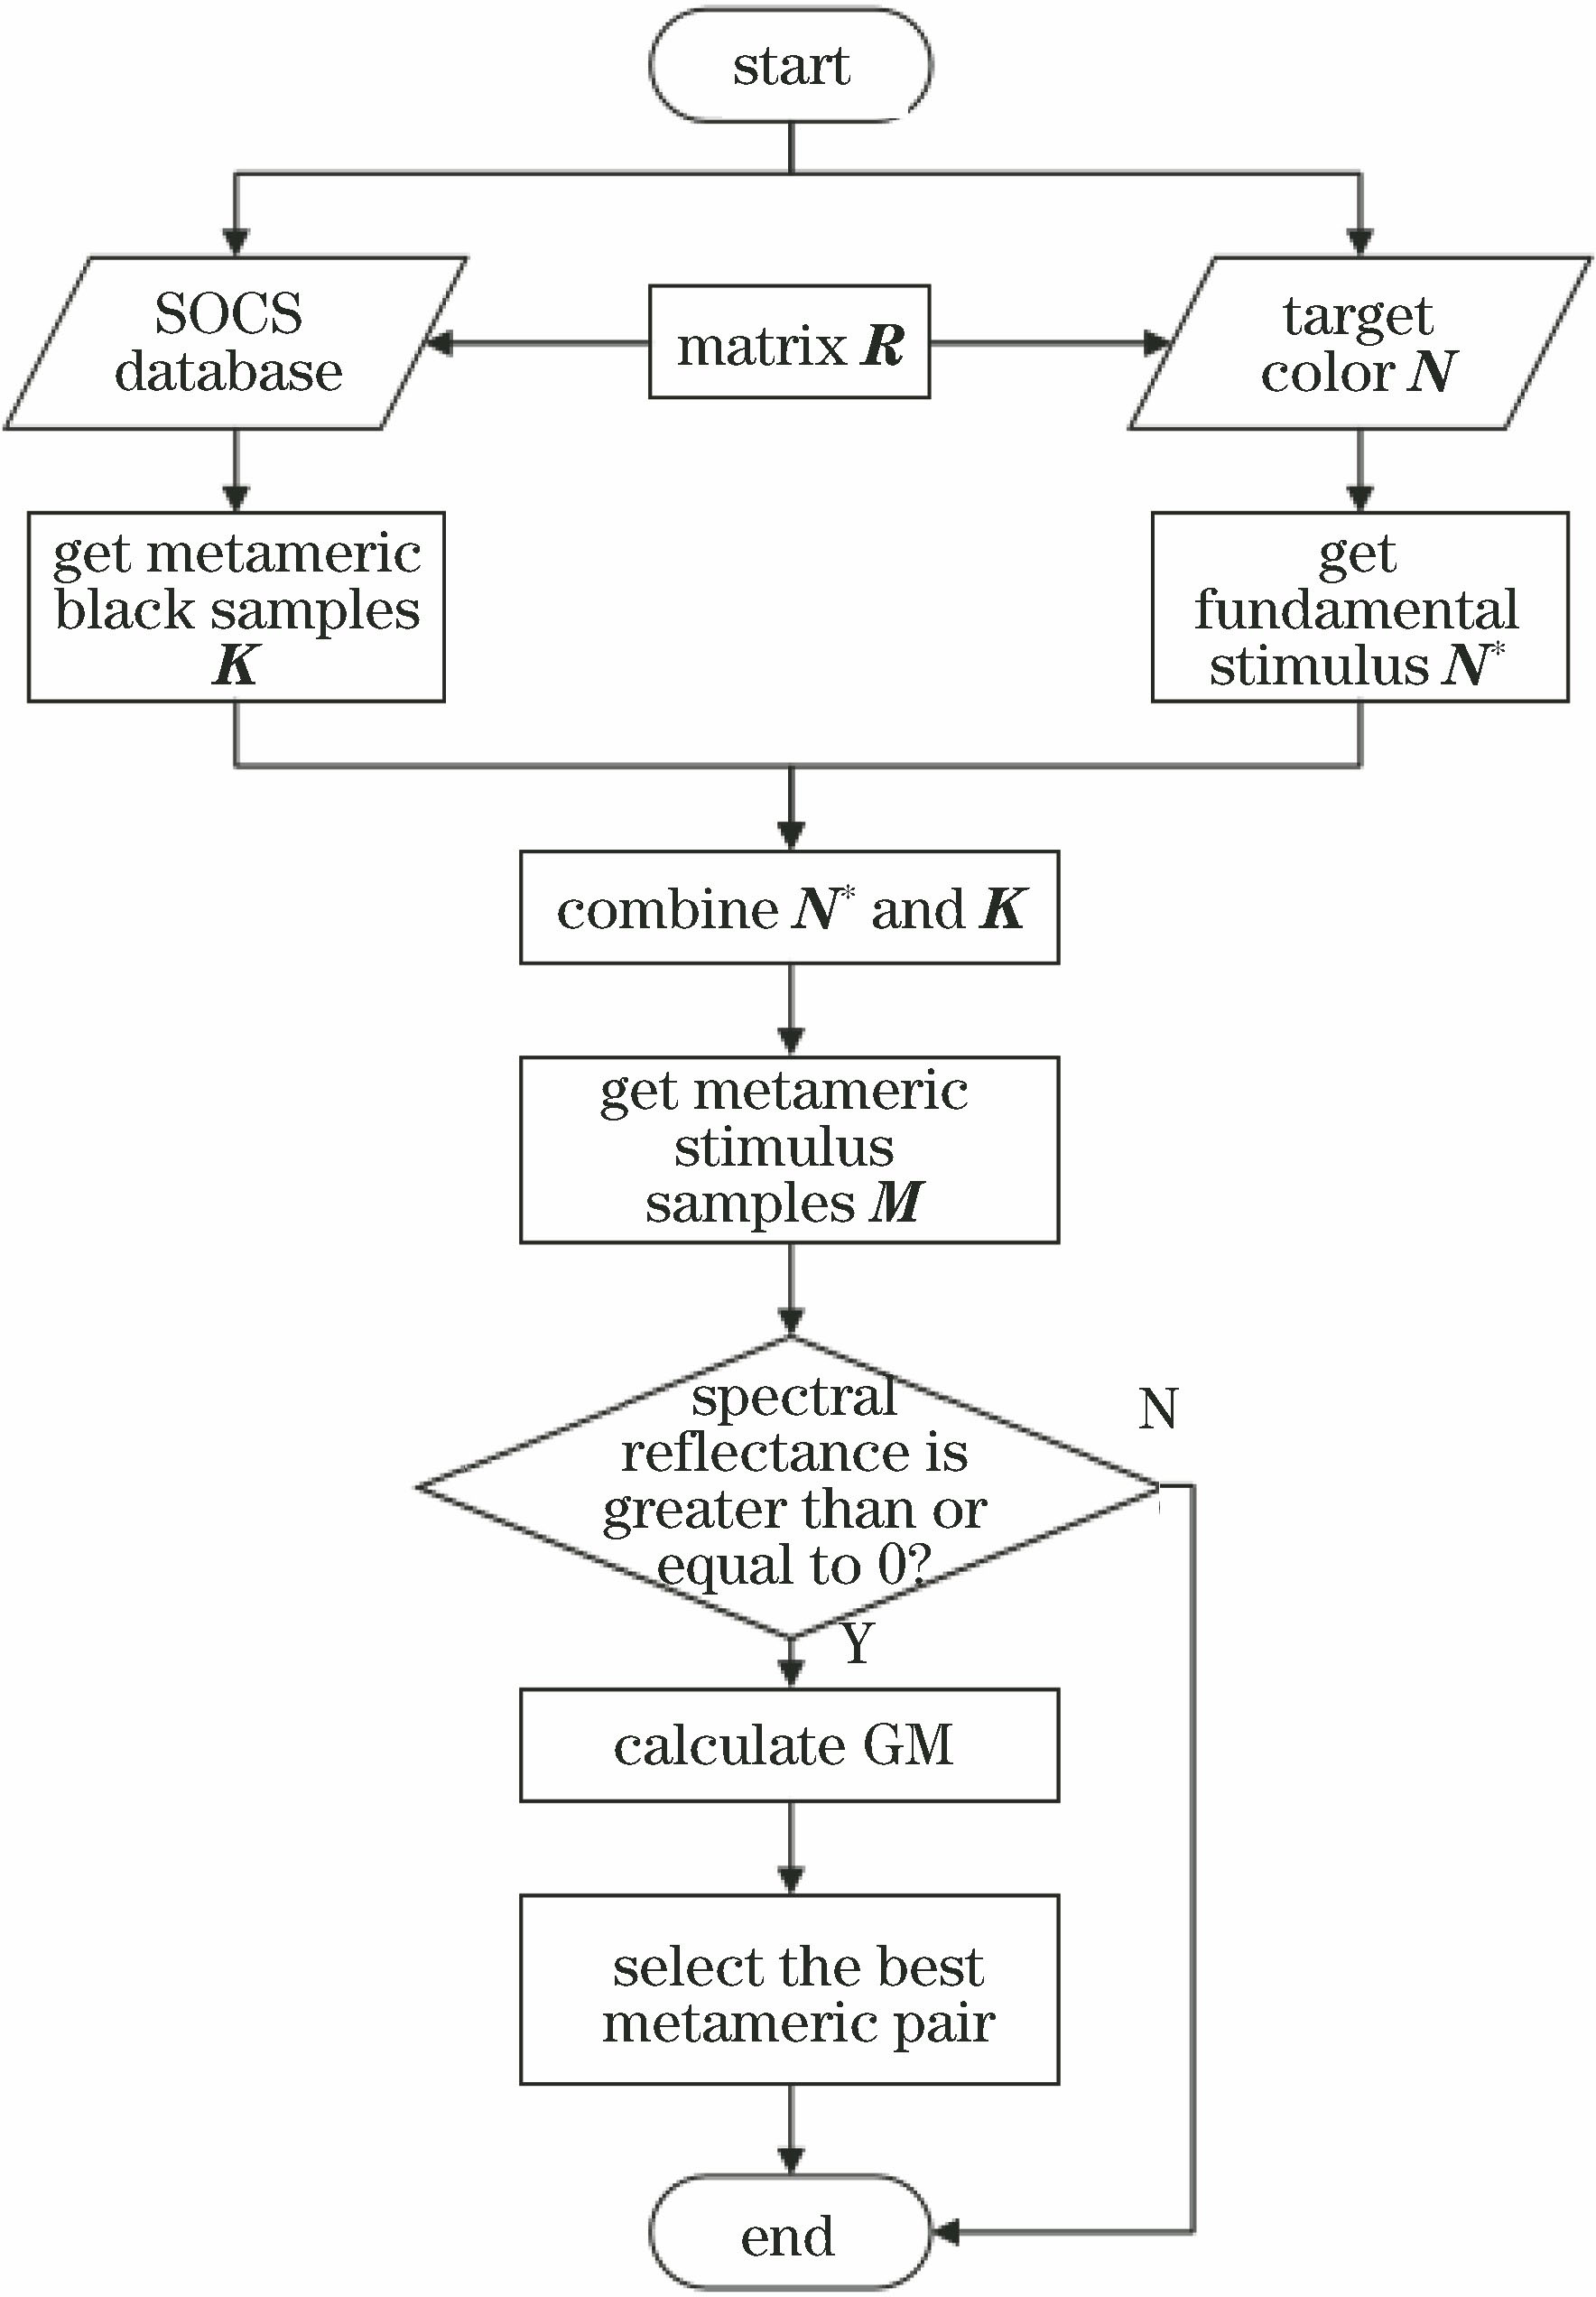 Flow chart of construction method of metameric pairs based on matrix R theory